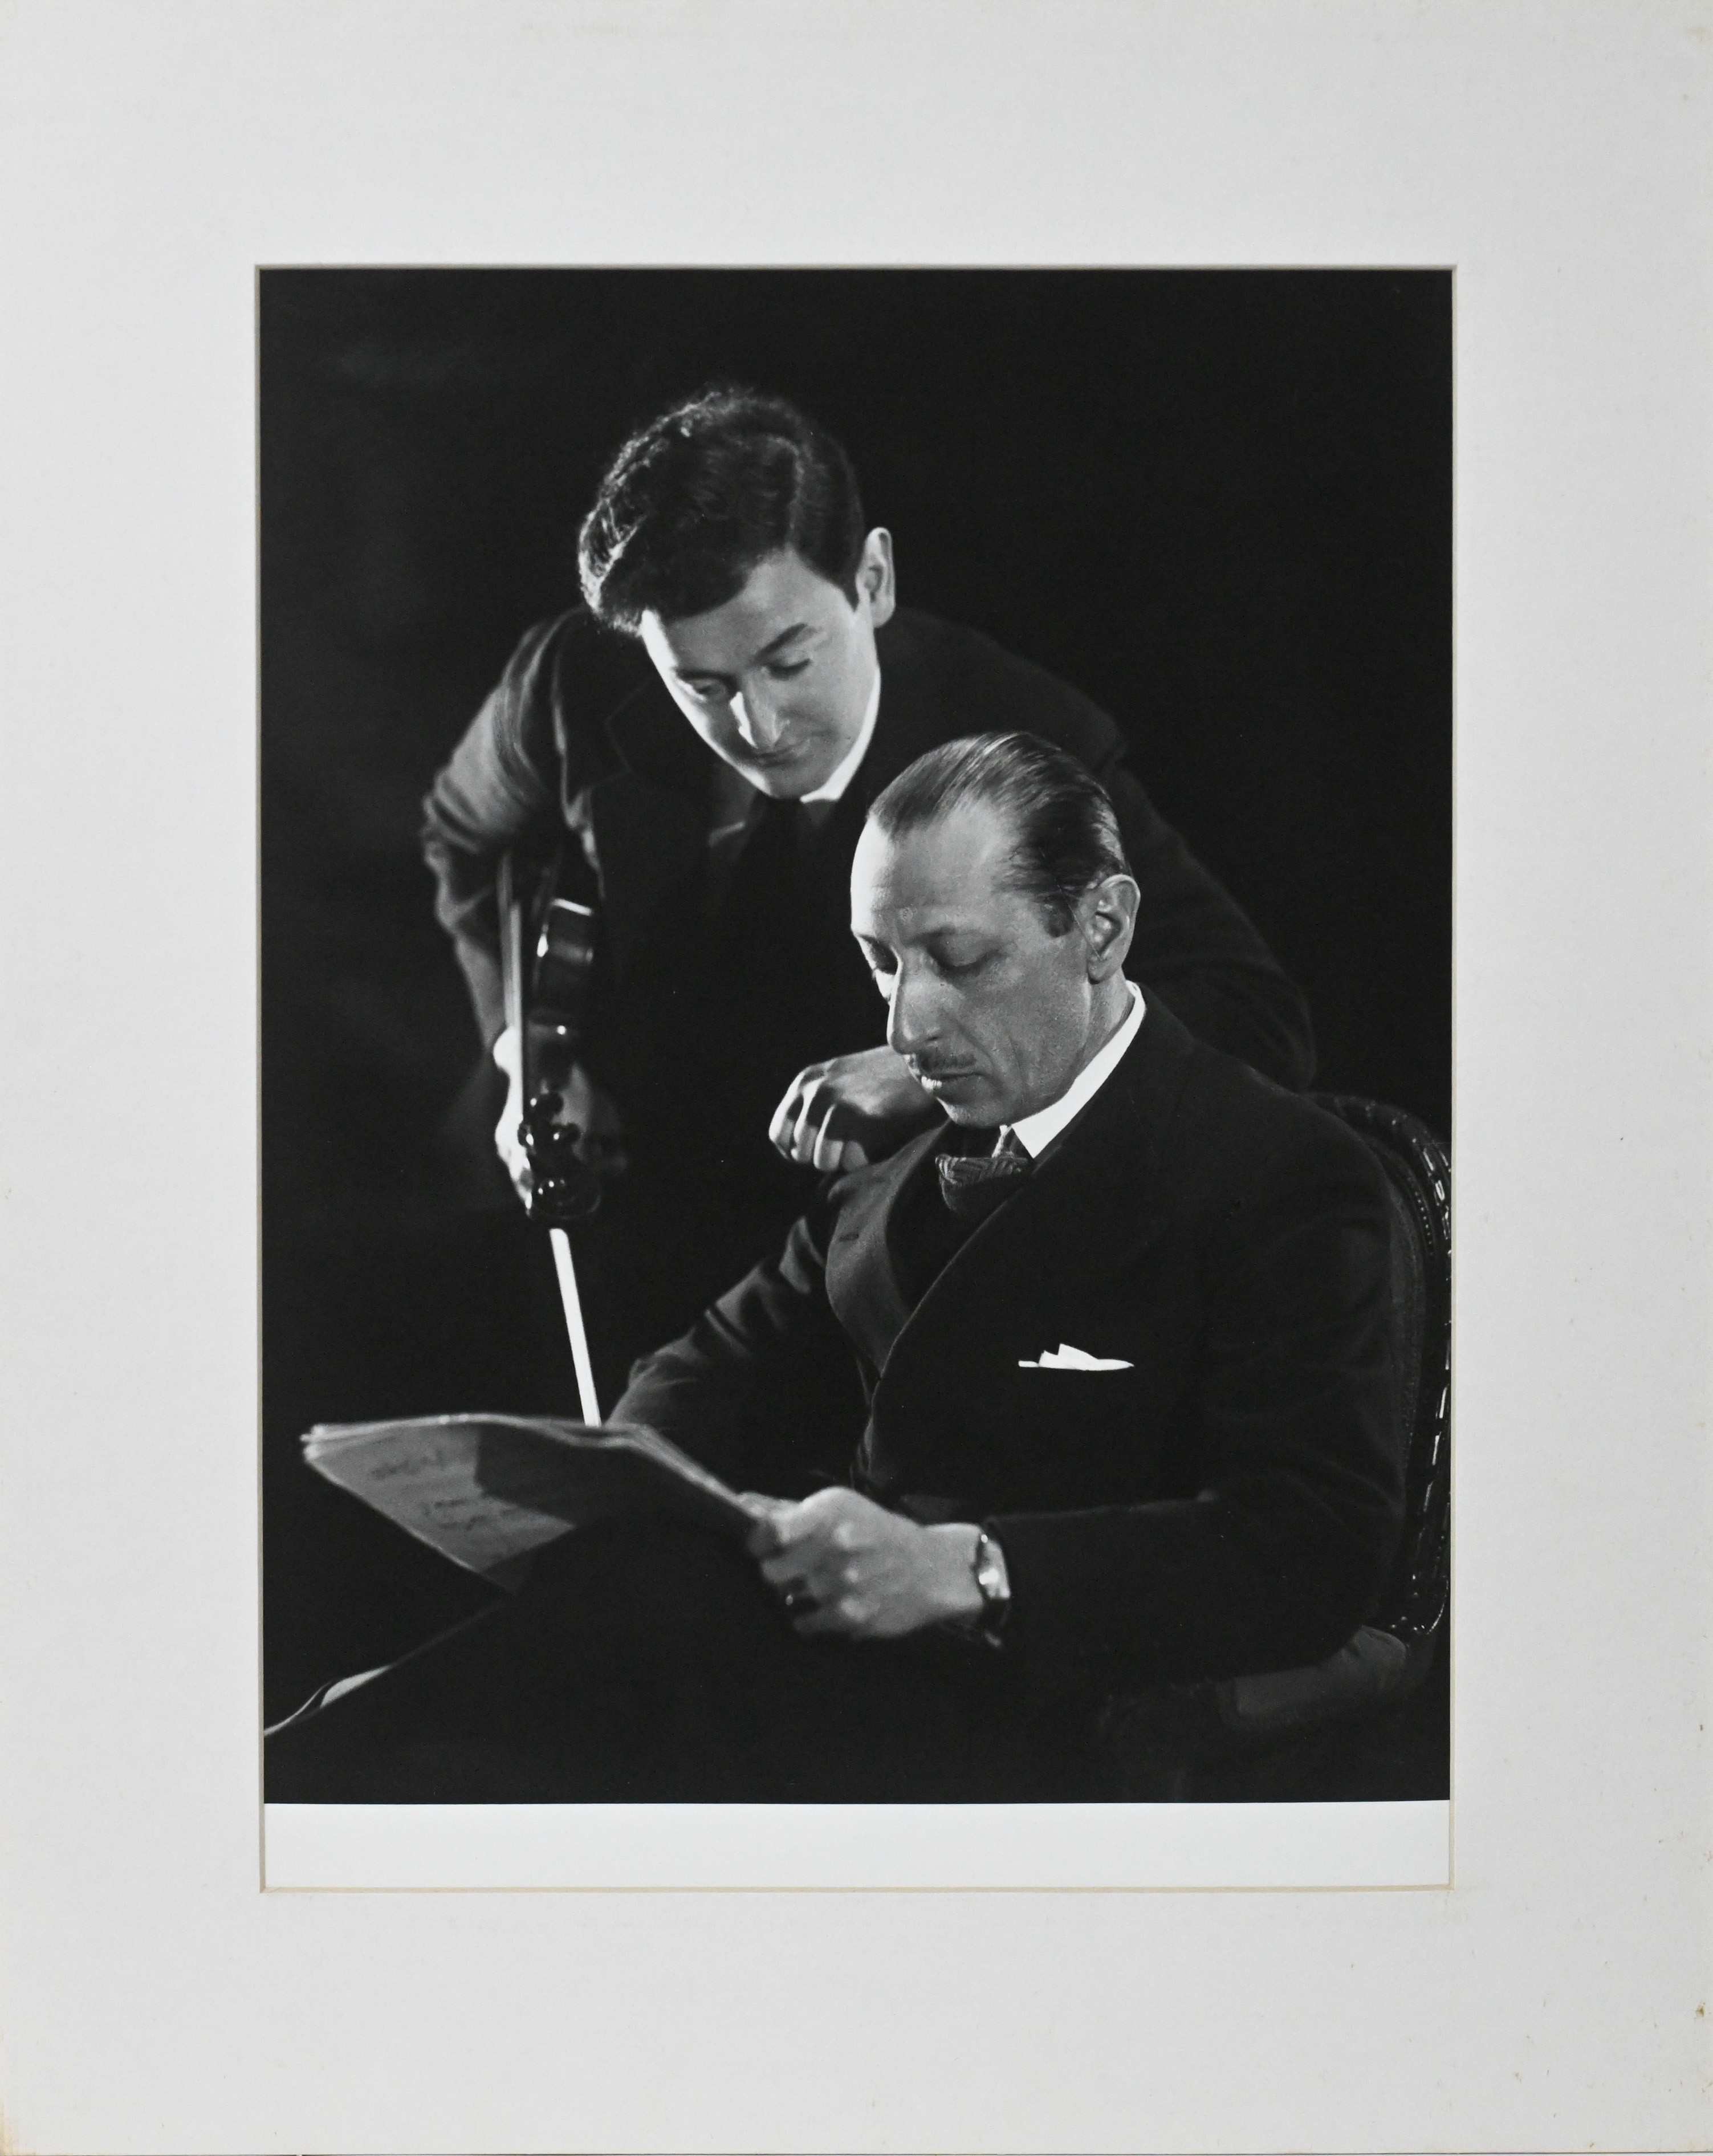 A black and white silver gelatine photographic print of two musicians, mounted, 38cm x 28cm. This